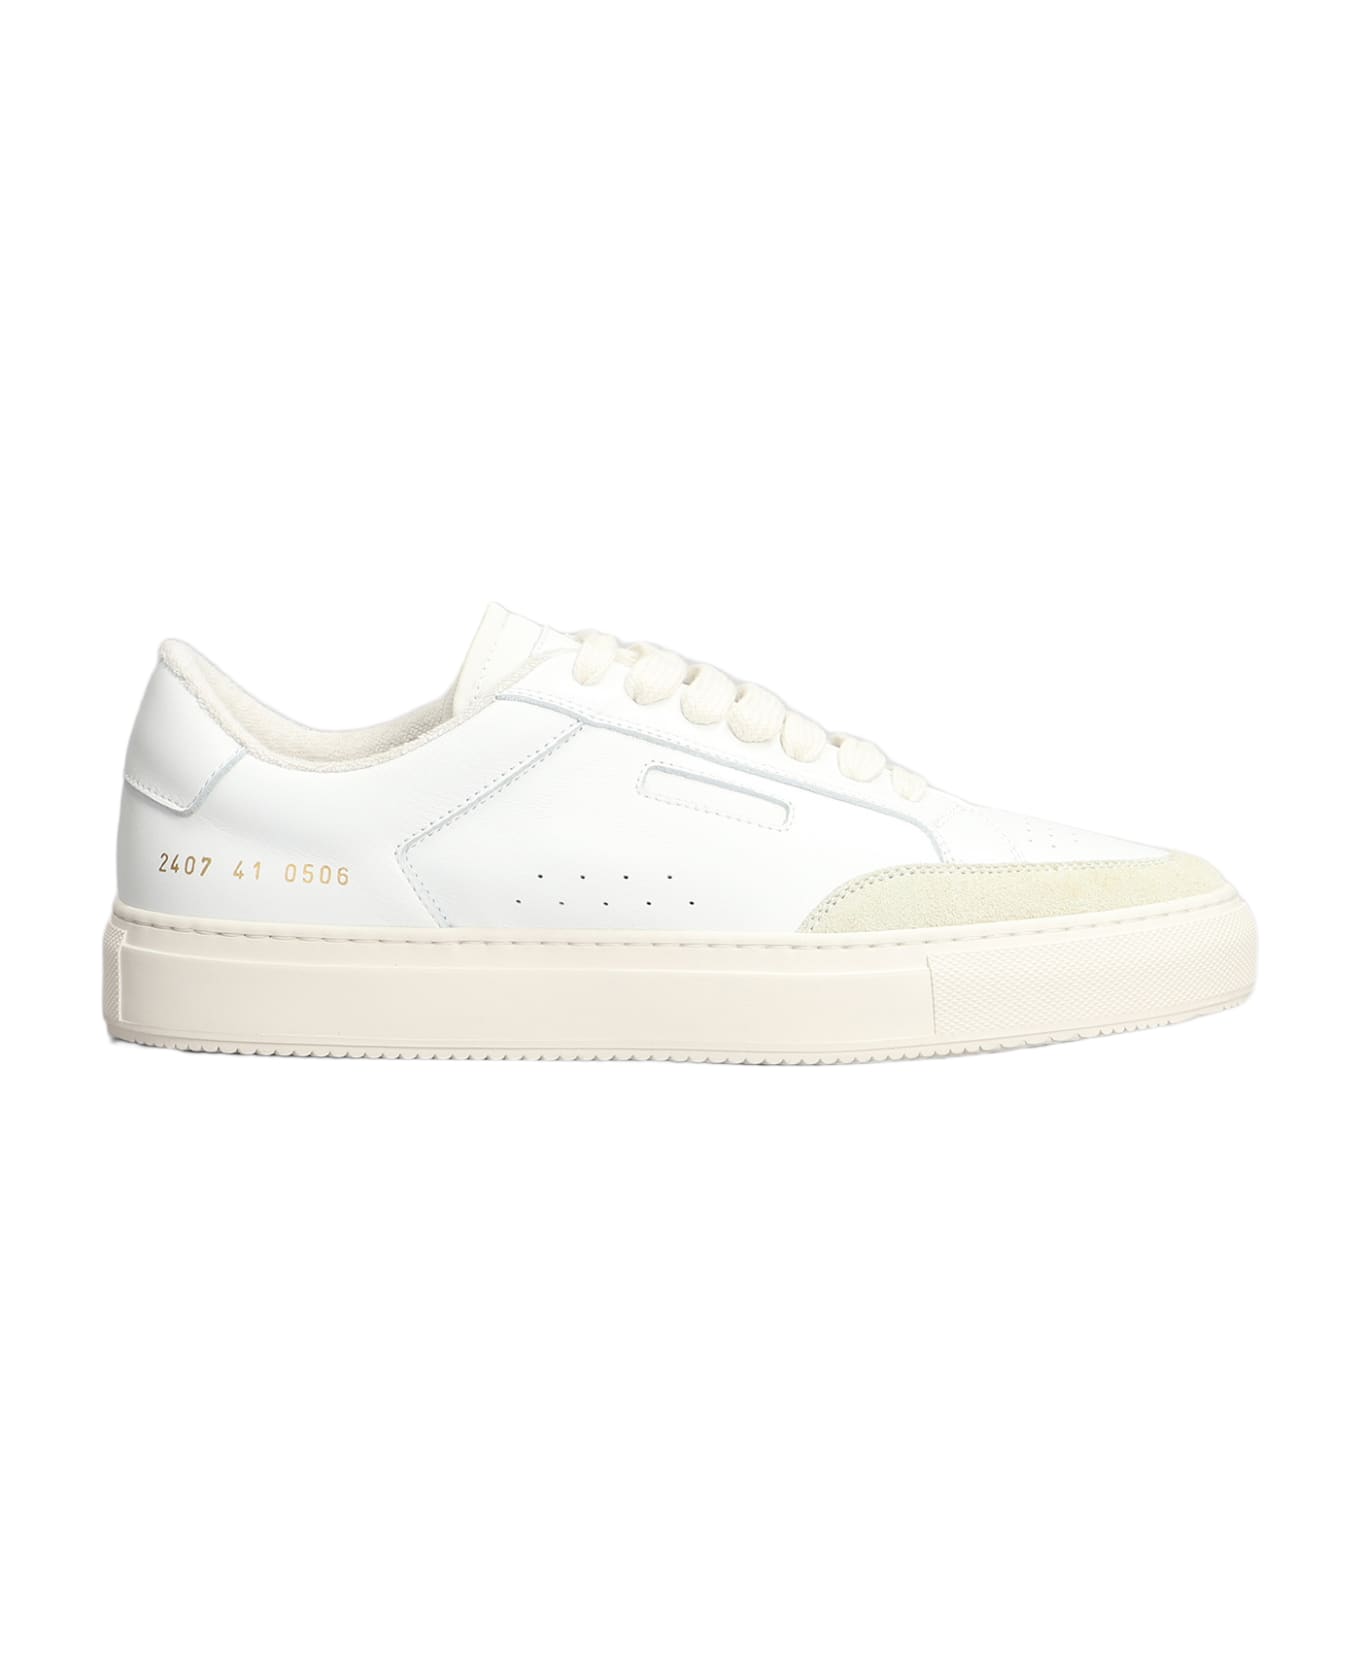 Common Projects Tennis Pro Sneakers In White Leather - White スニーカー